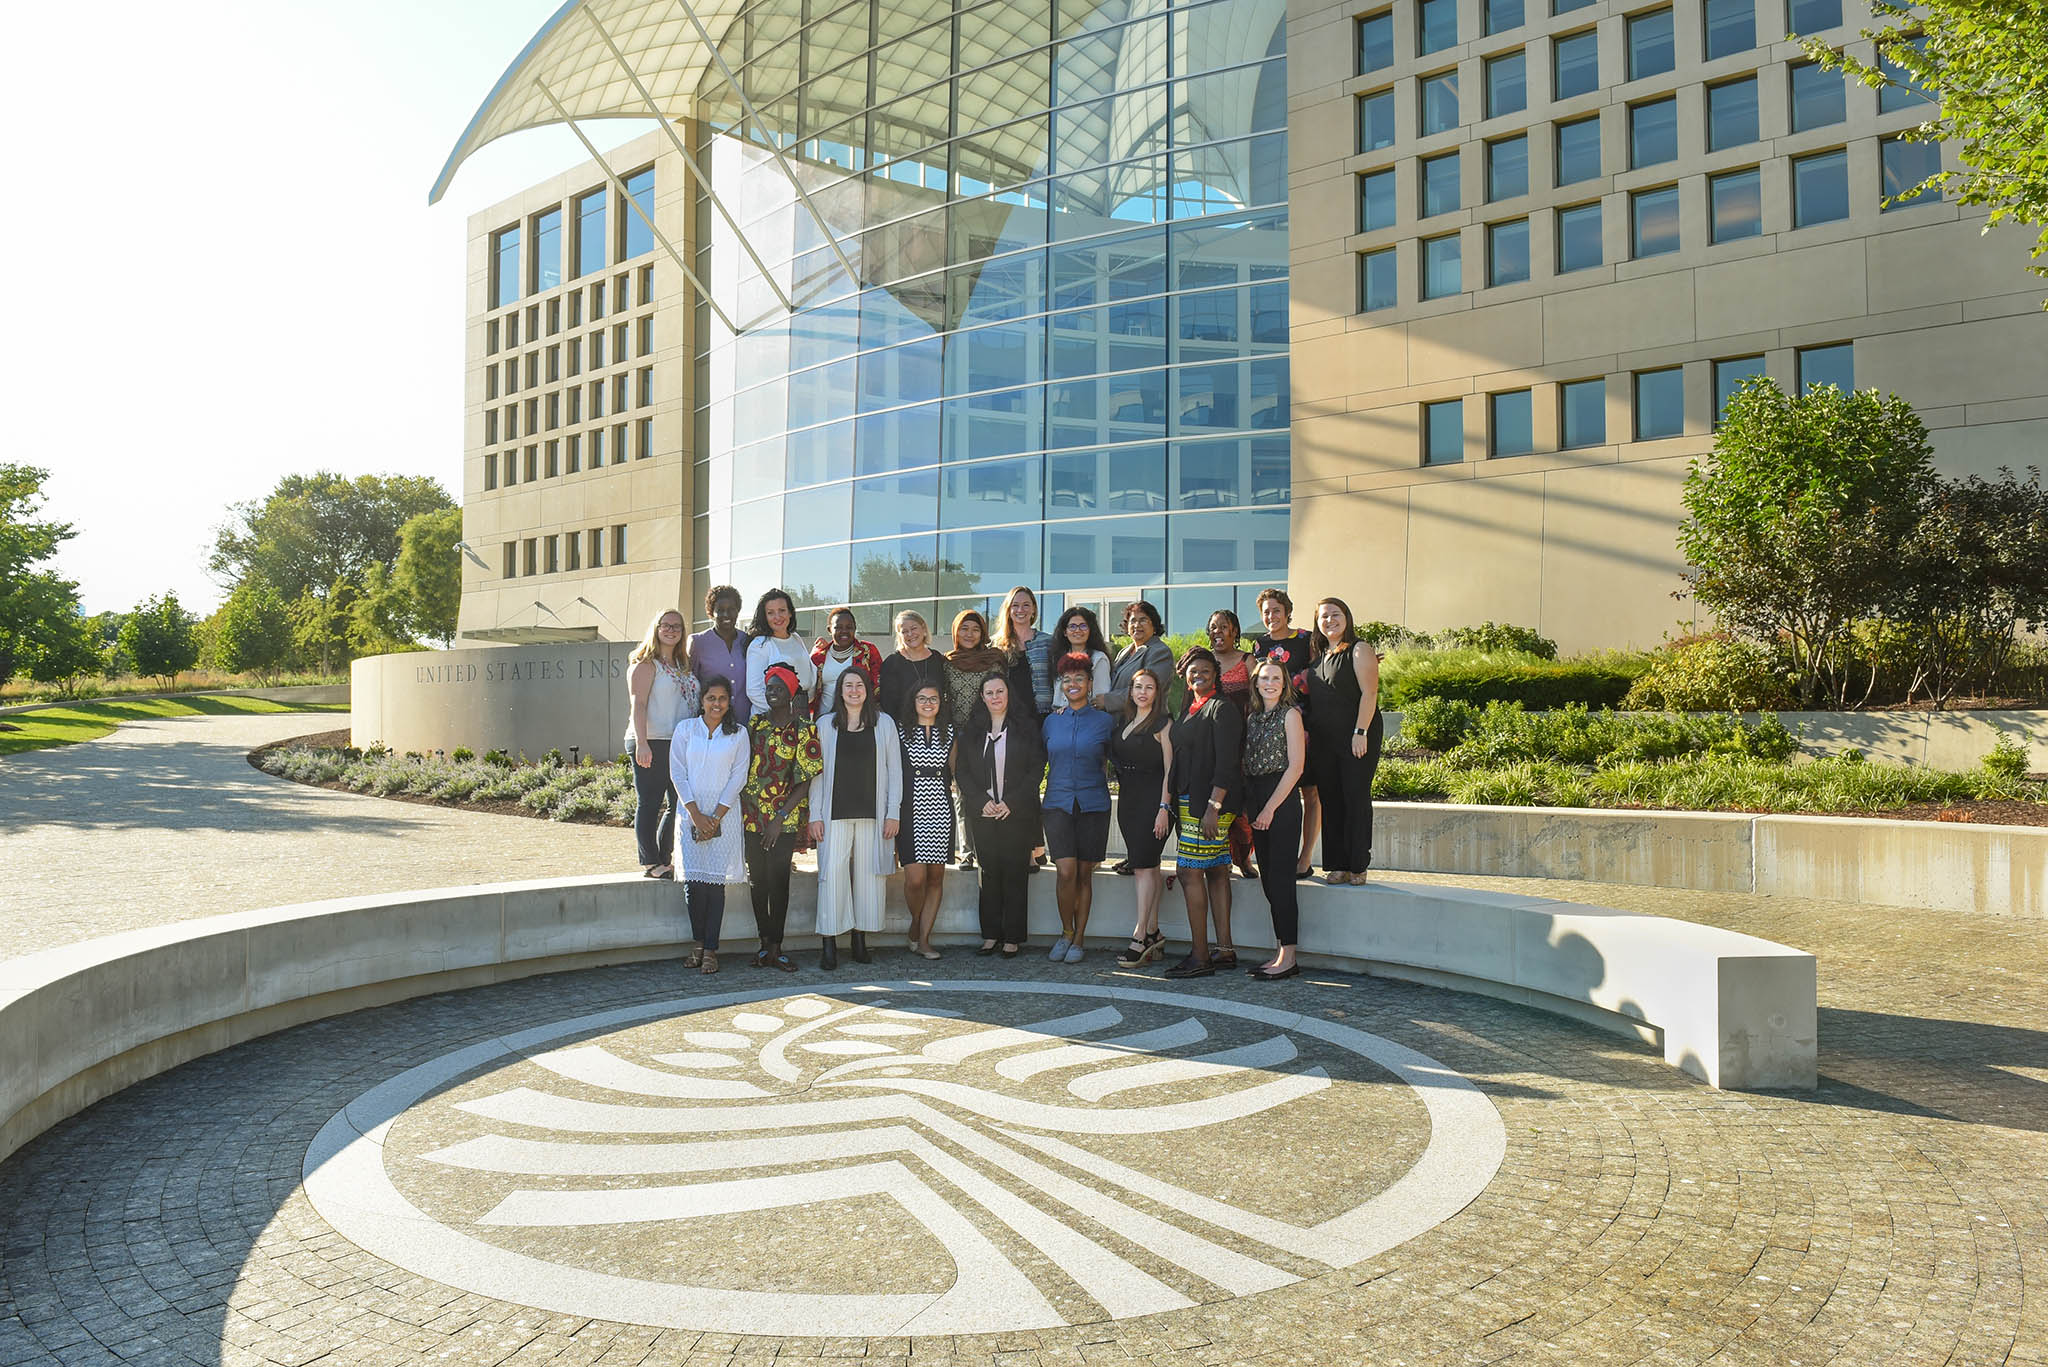 Civil society leaders and facilitators at USIP in August.